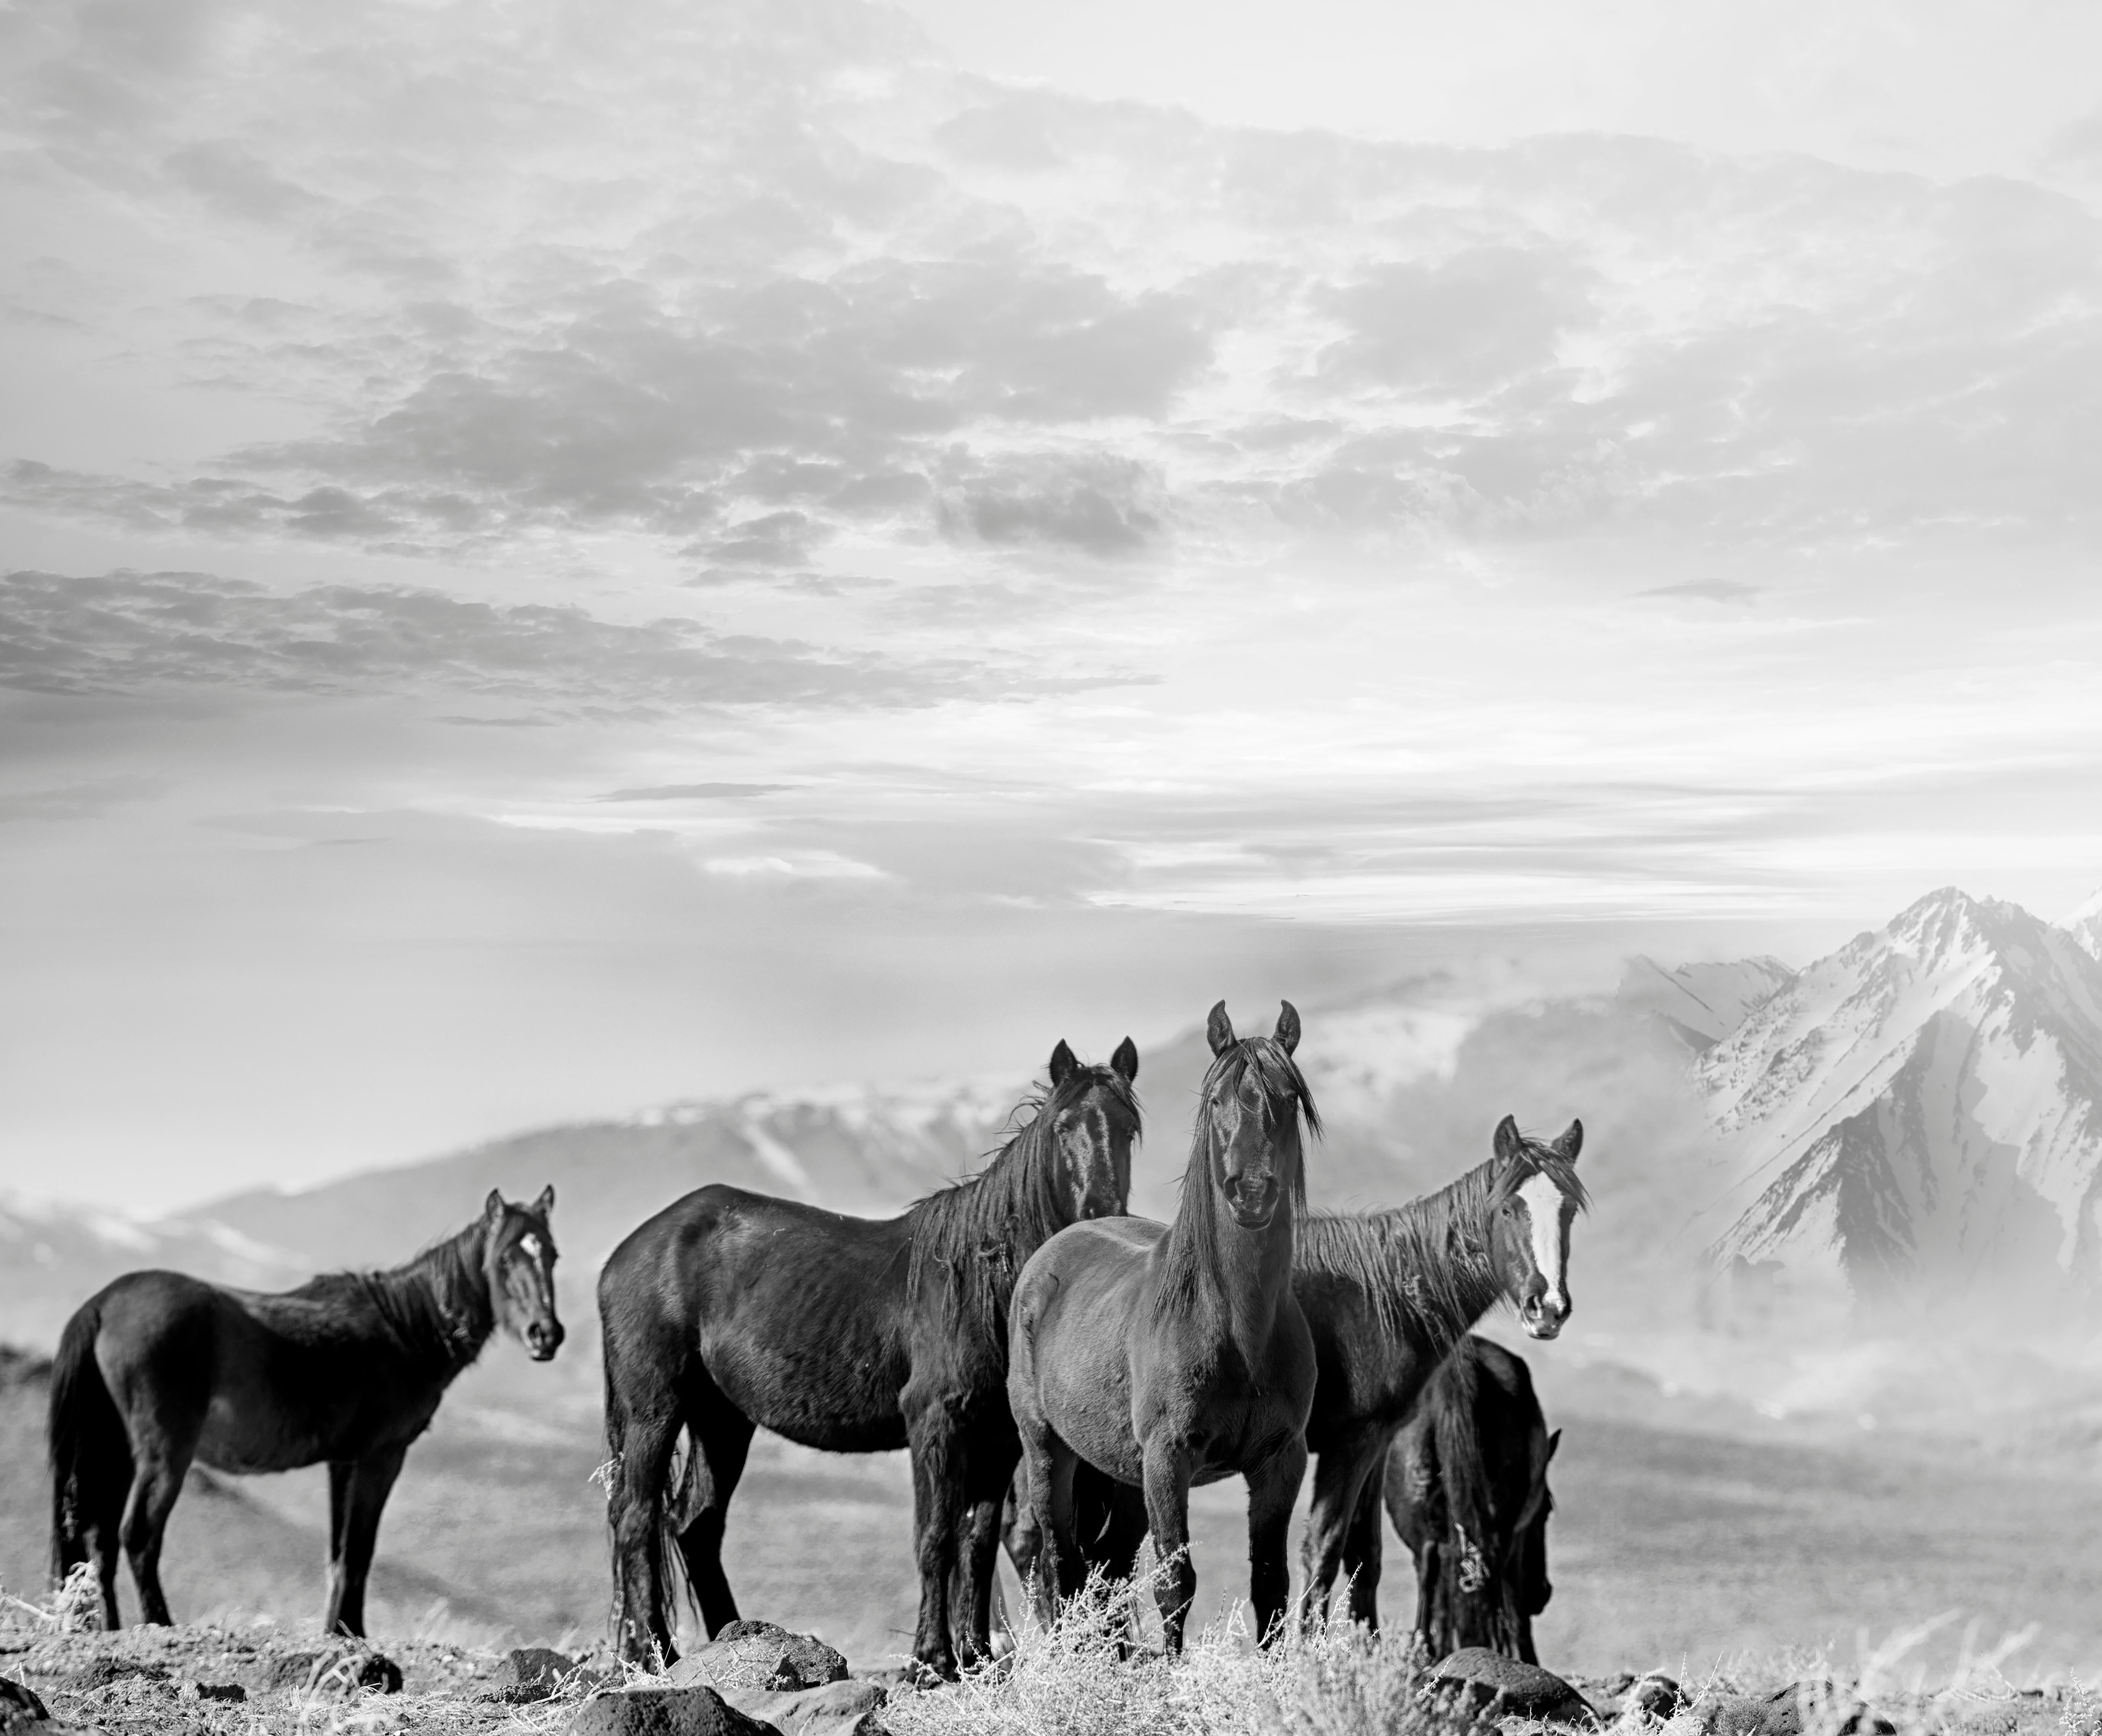 Black and White Photograph Shane Russeck - High Sierra Mustangs 36x48 Photographie noir et blanc Chevaux sauvages, Mustangs